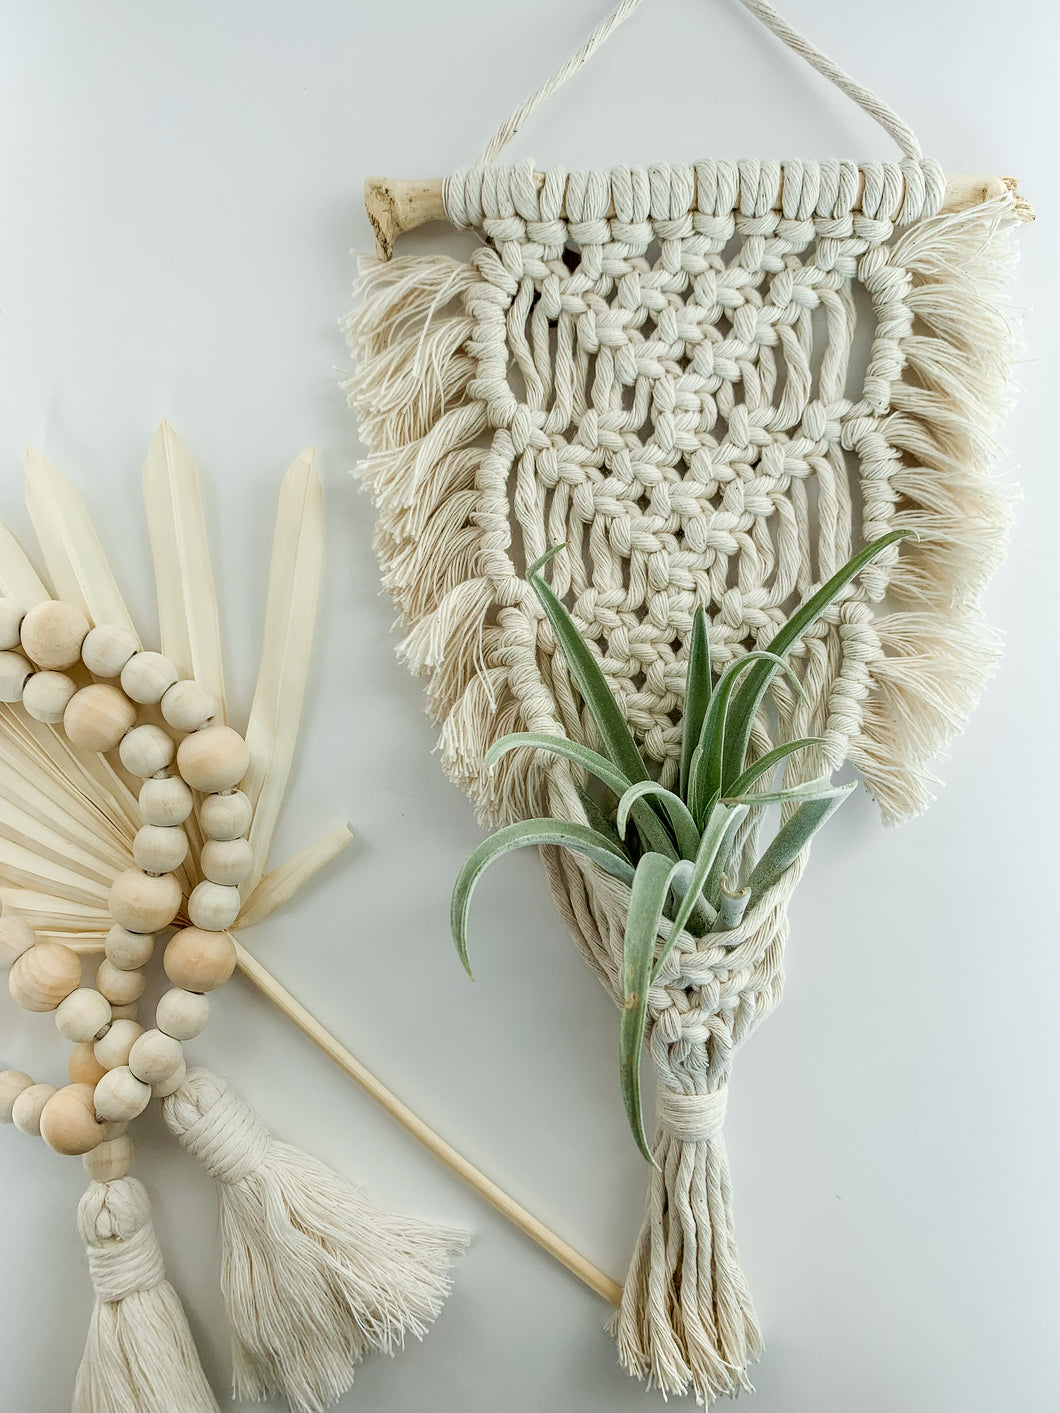 A macrame air plant wall hanger with fringe detailing